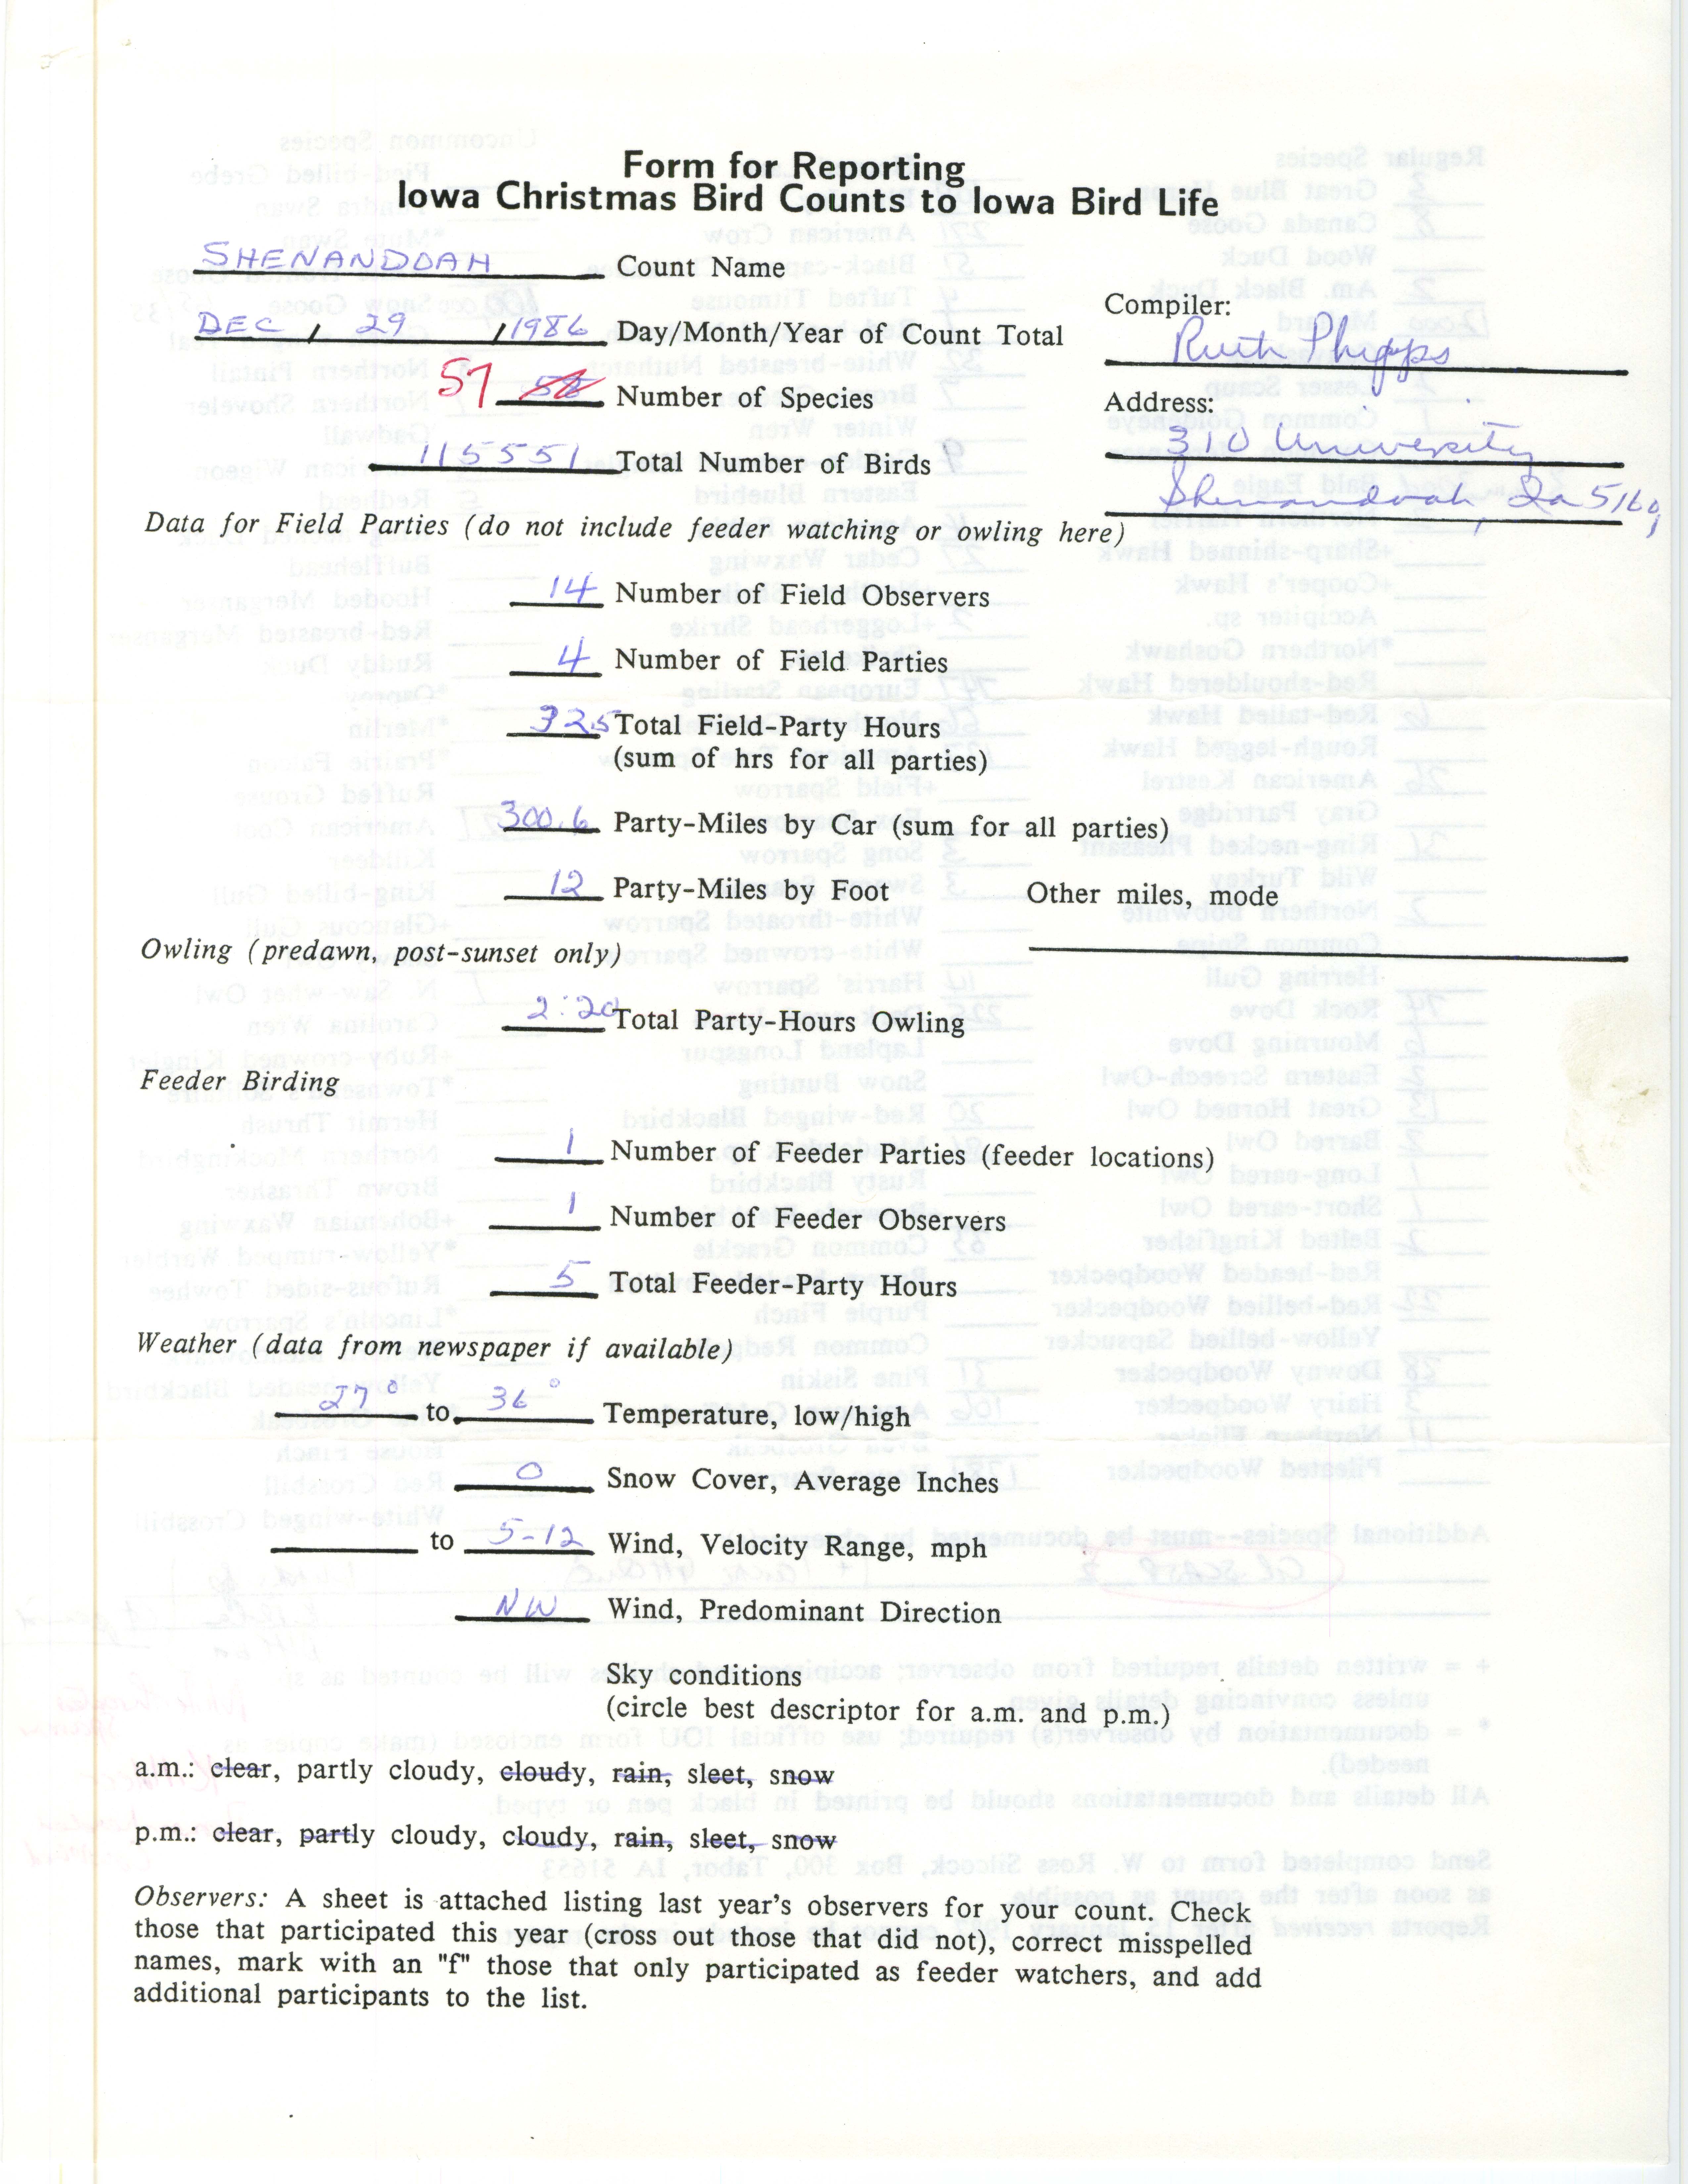 Form for reporting Iowa Christmas bird counts to Iowa Bird Life, Ruth Phipps, December 29, 1986